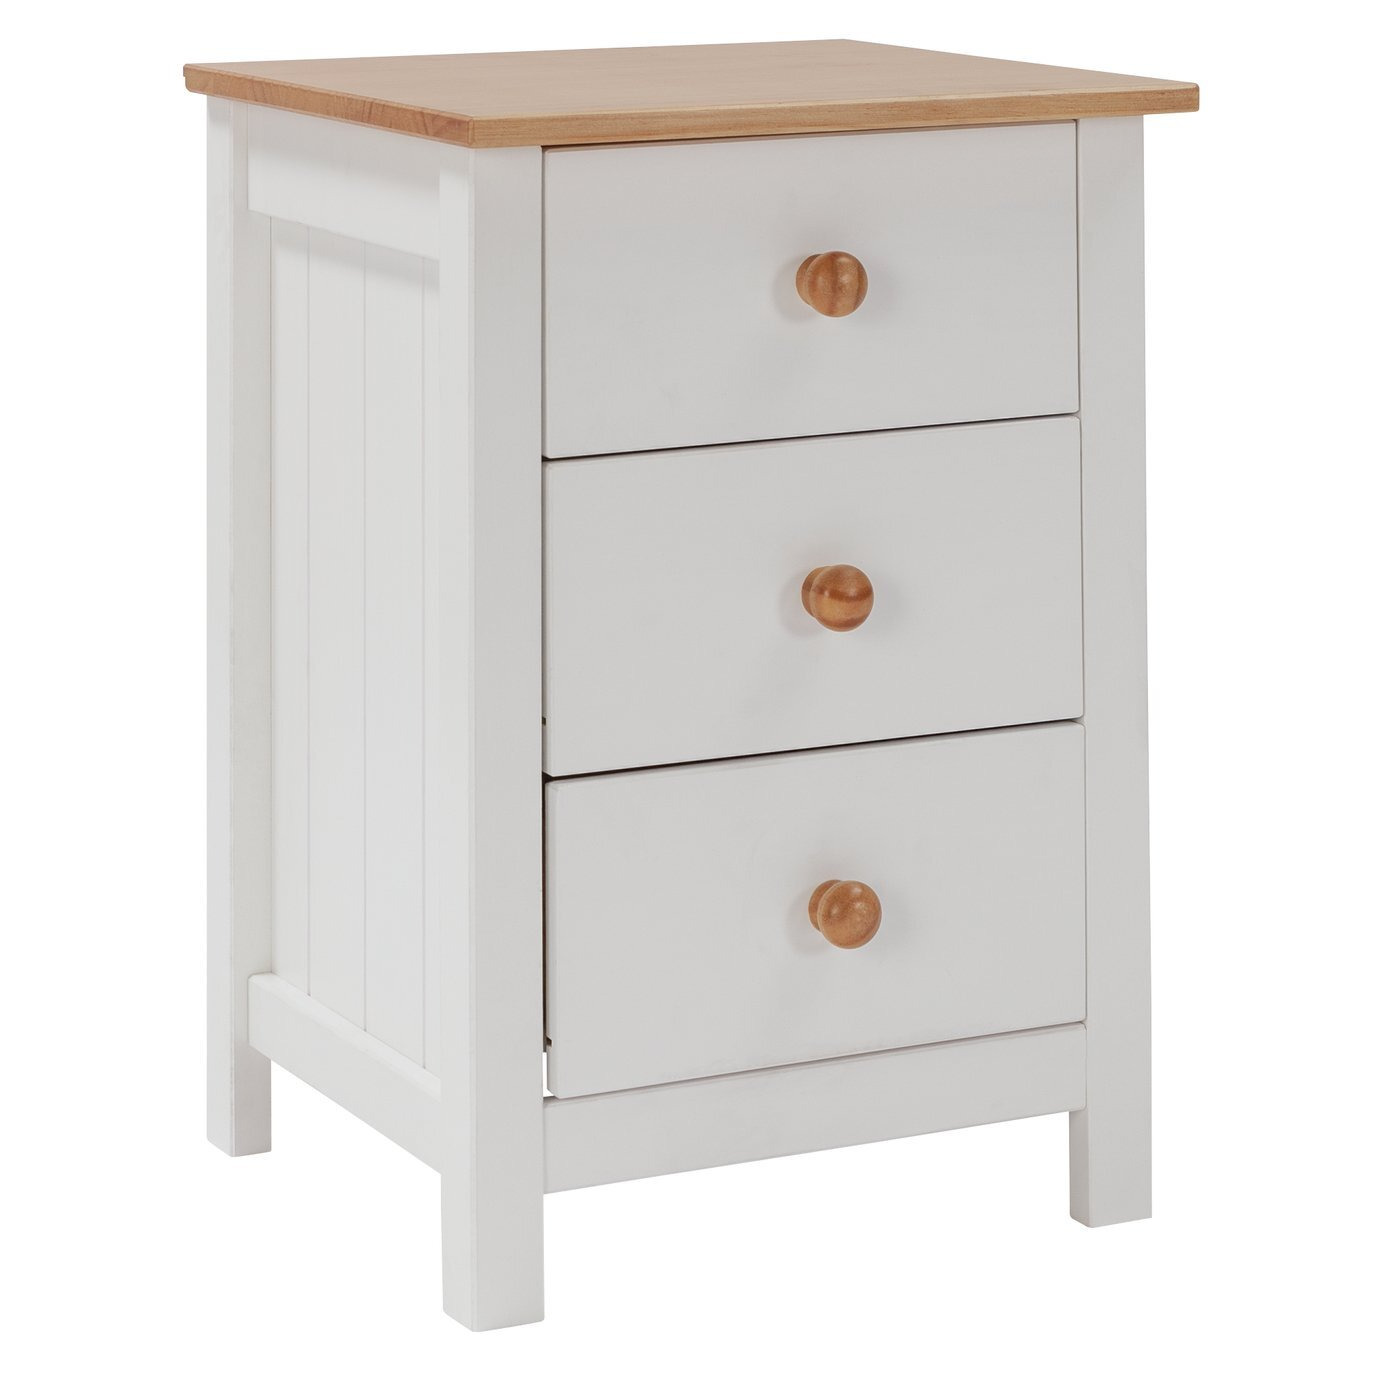 Argos Home Scandinavia 3 Drawer Bedside Table - Two Tone - image 1